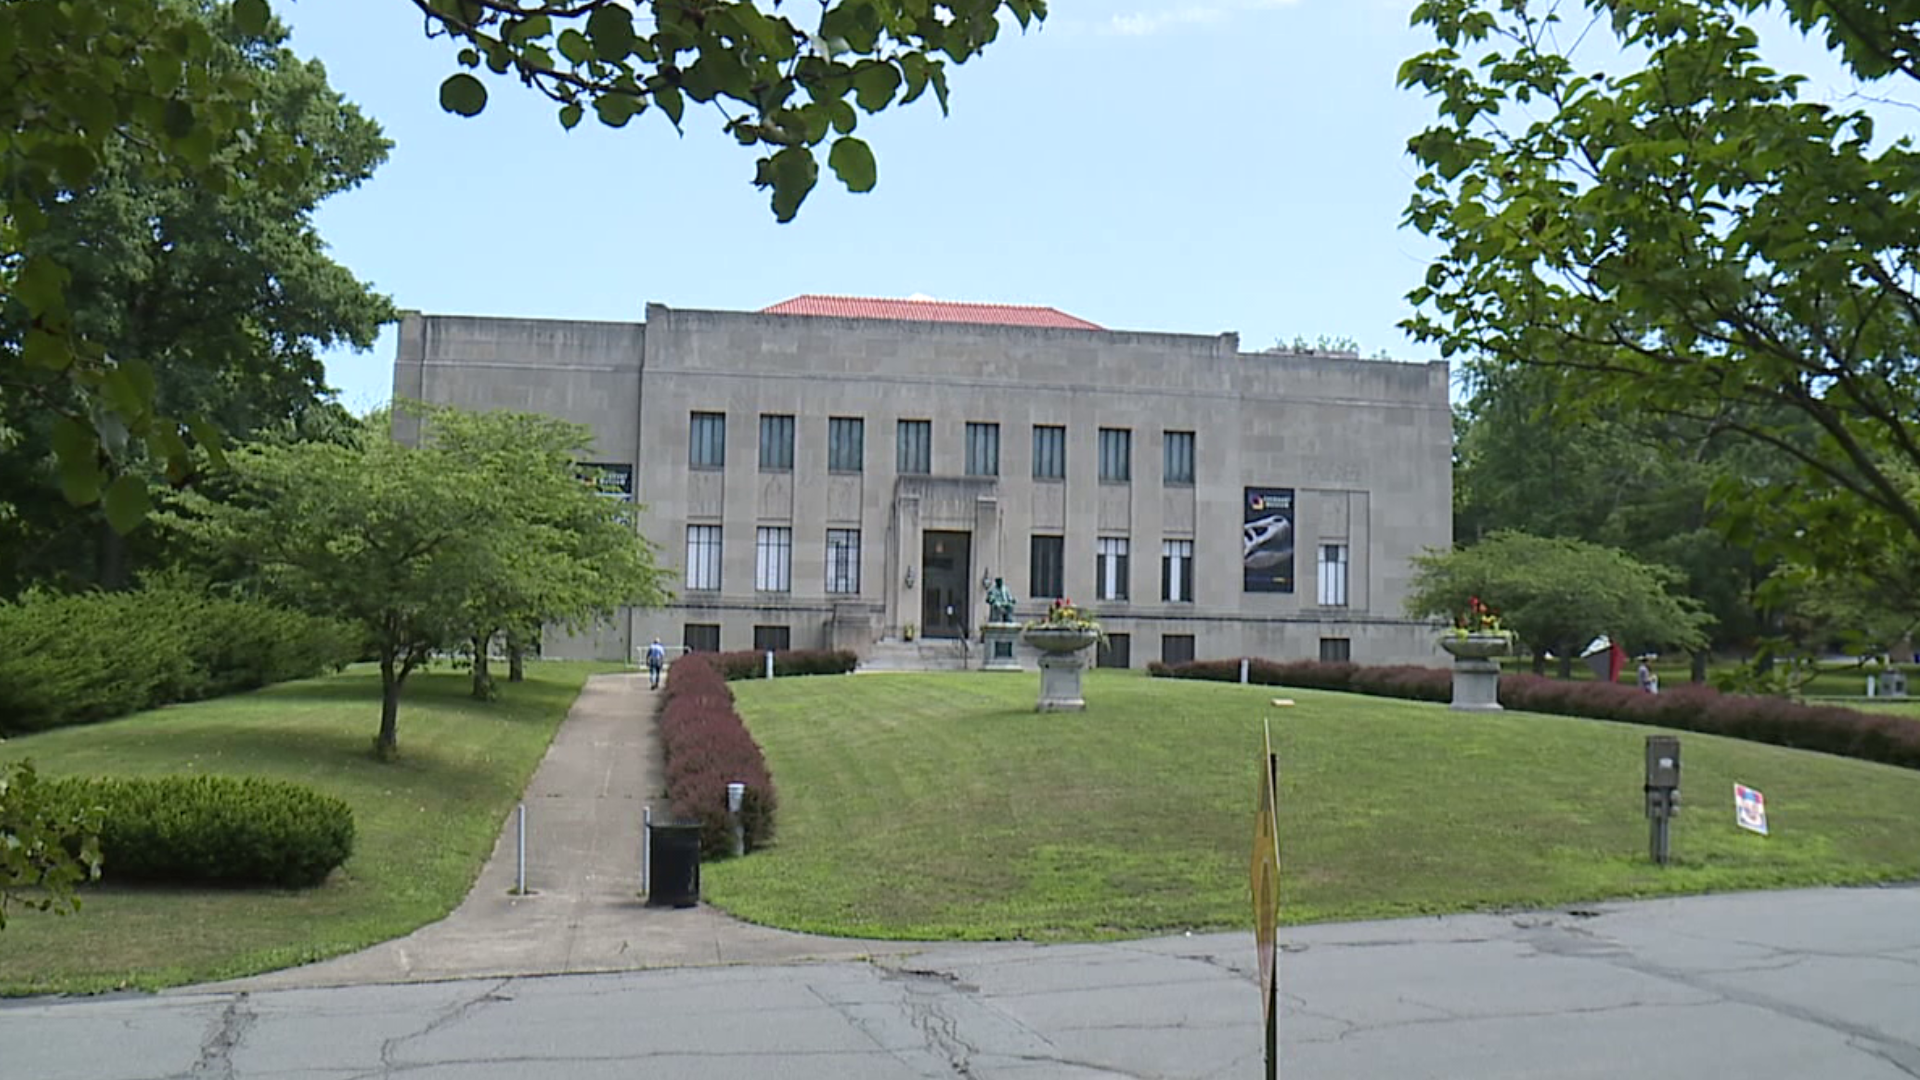 The museum in Scranton, closed during the pandemic, is receiving some financial assistance that will allow it to continue to educate people in our area.